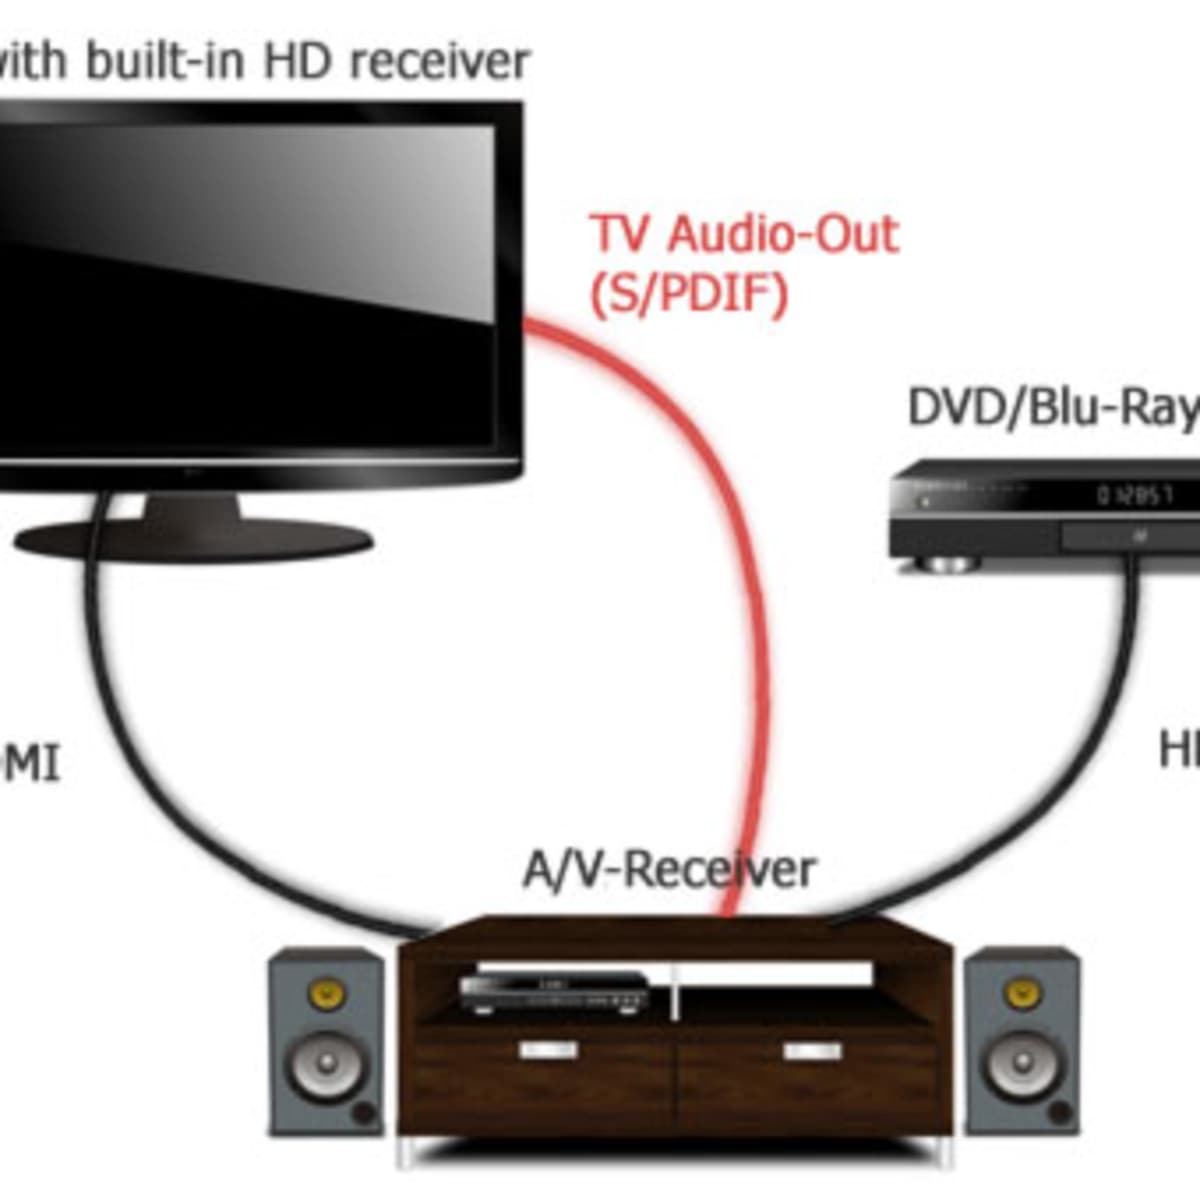 What is the Audio Return Channel (ARC) feature?